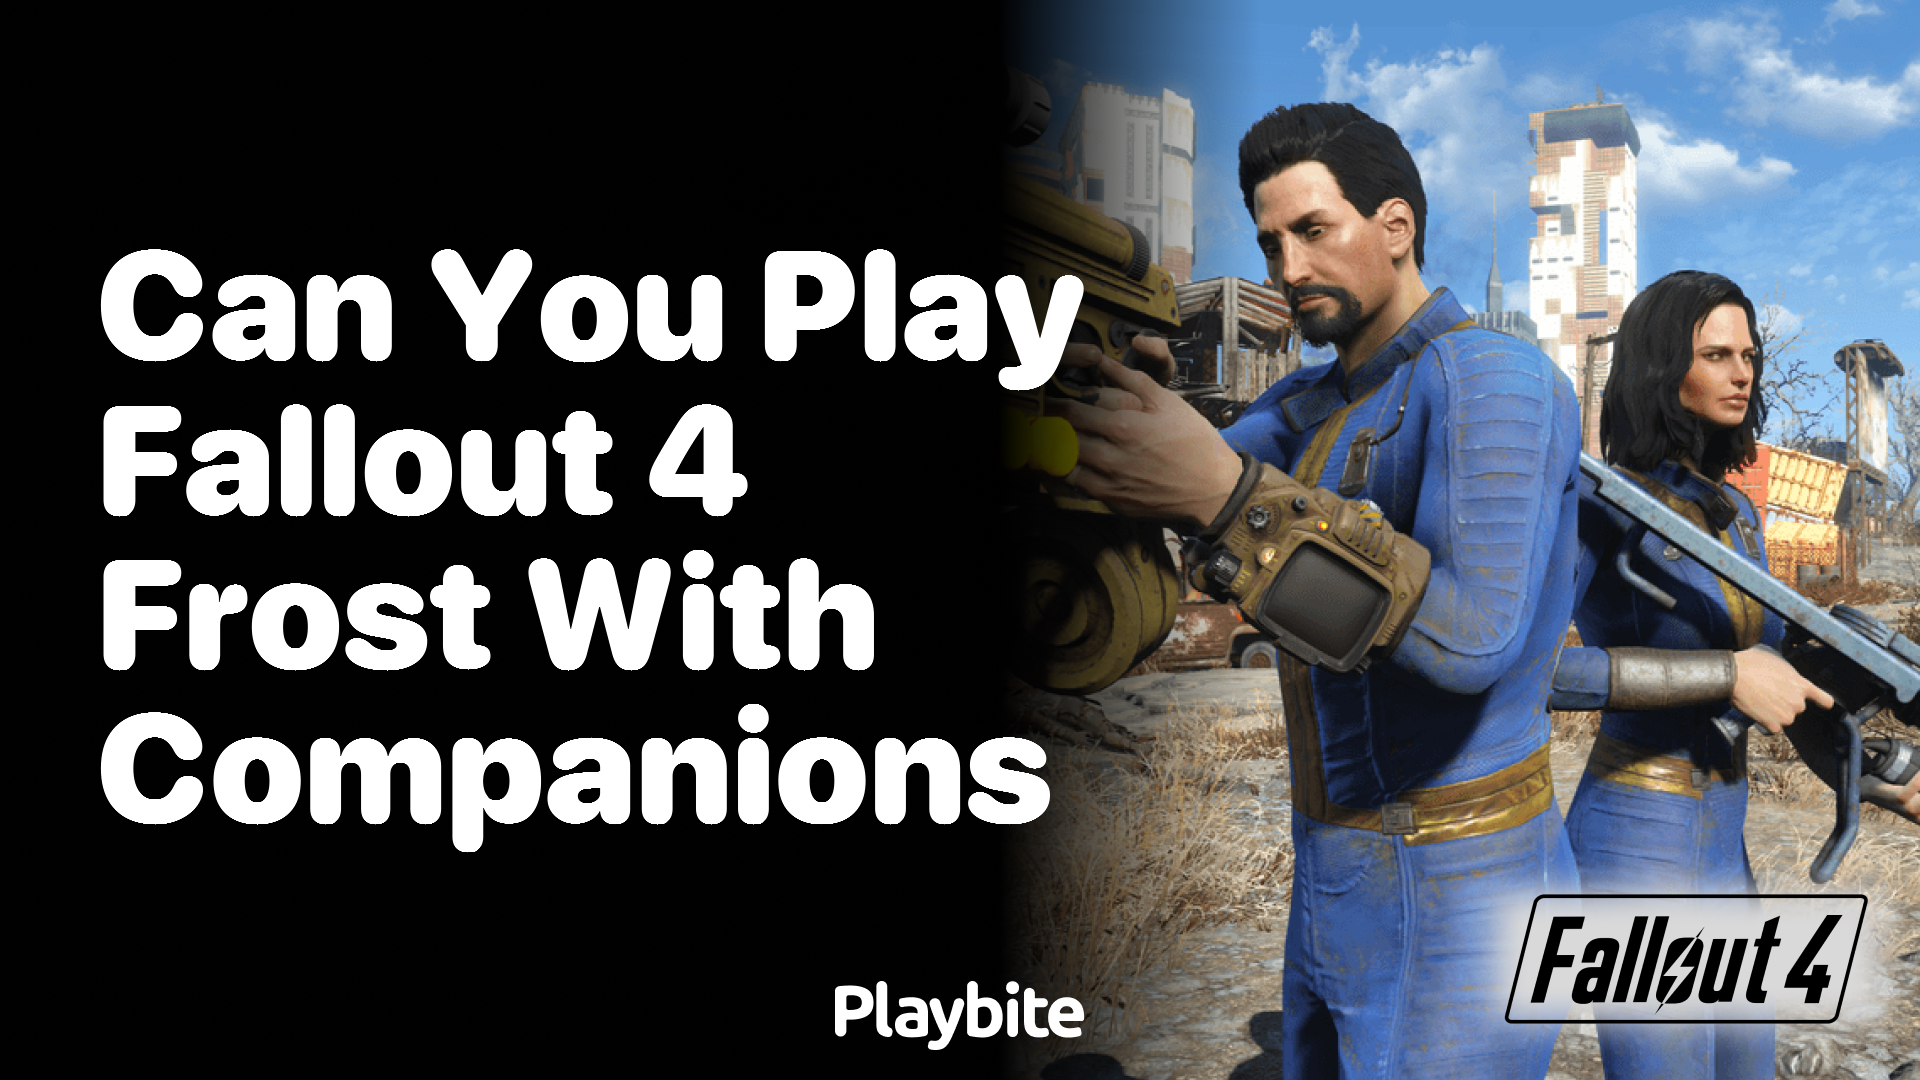 Can You Play Fallout 4 Frost with Companions?